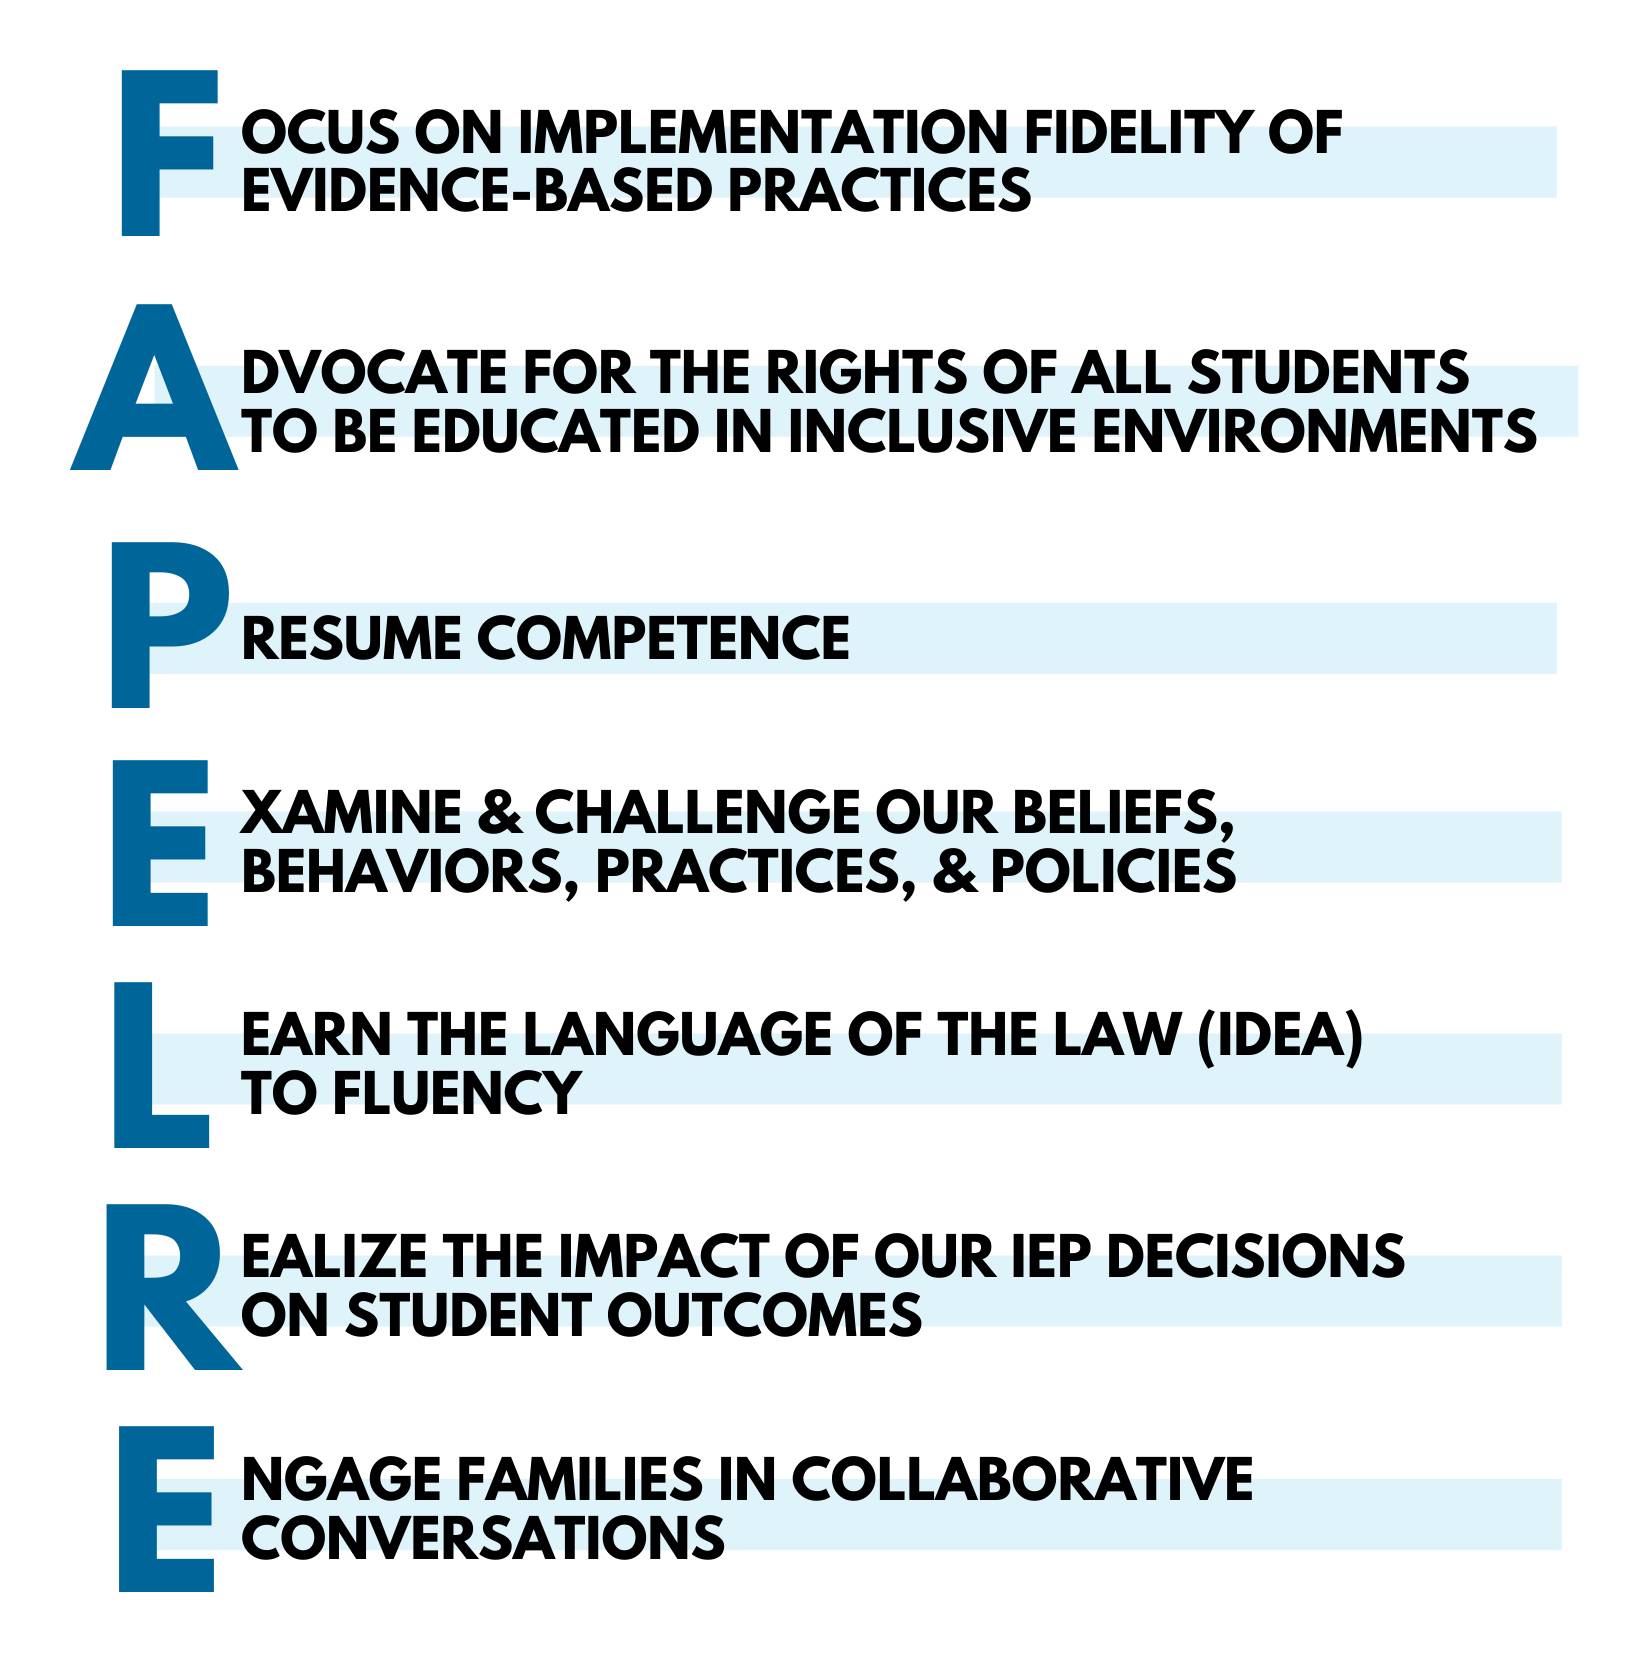 Focus on implementation fidelity of evidence based practices; advocate for the rights of all students to be educated in inclusive environments; presume competence; examine and challenge our beliefs, behaviors, practices, policies; learn the language of the law (IDEA) to fluency; realize the impact of our IEP decisions on student outcomes; engage families in collaborative conversations